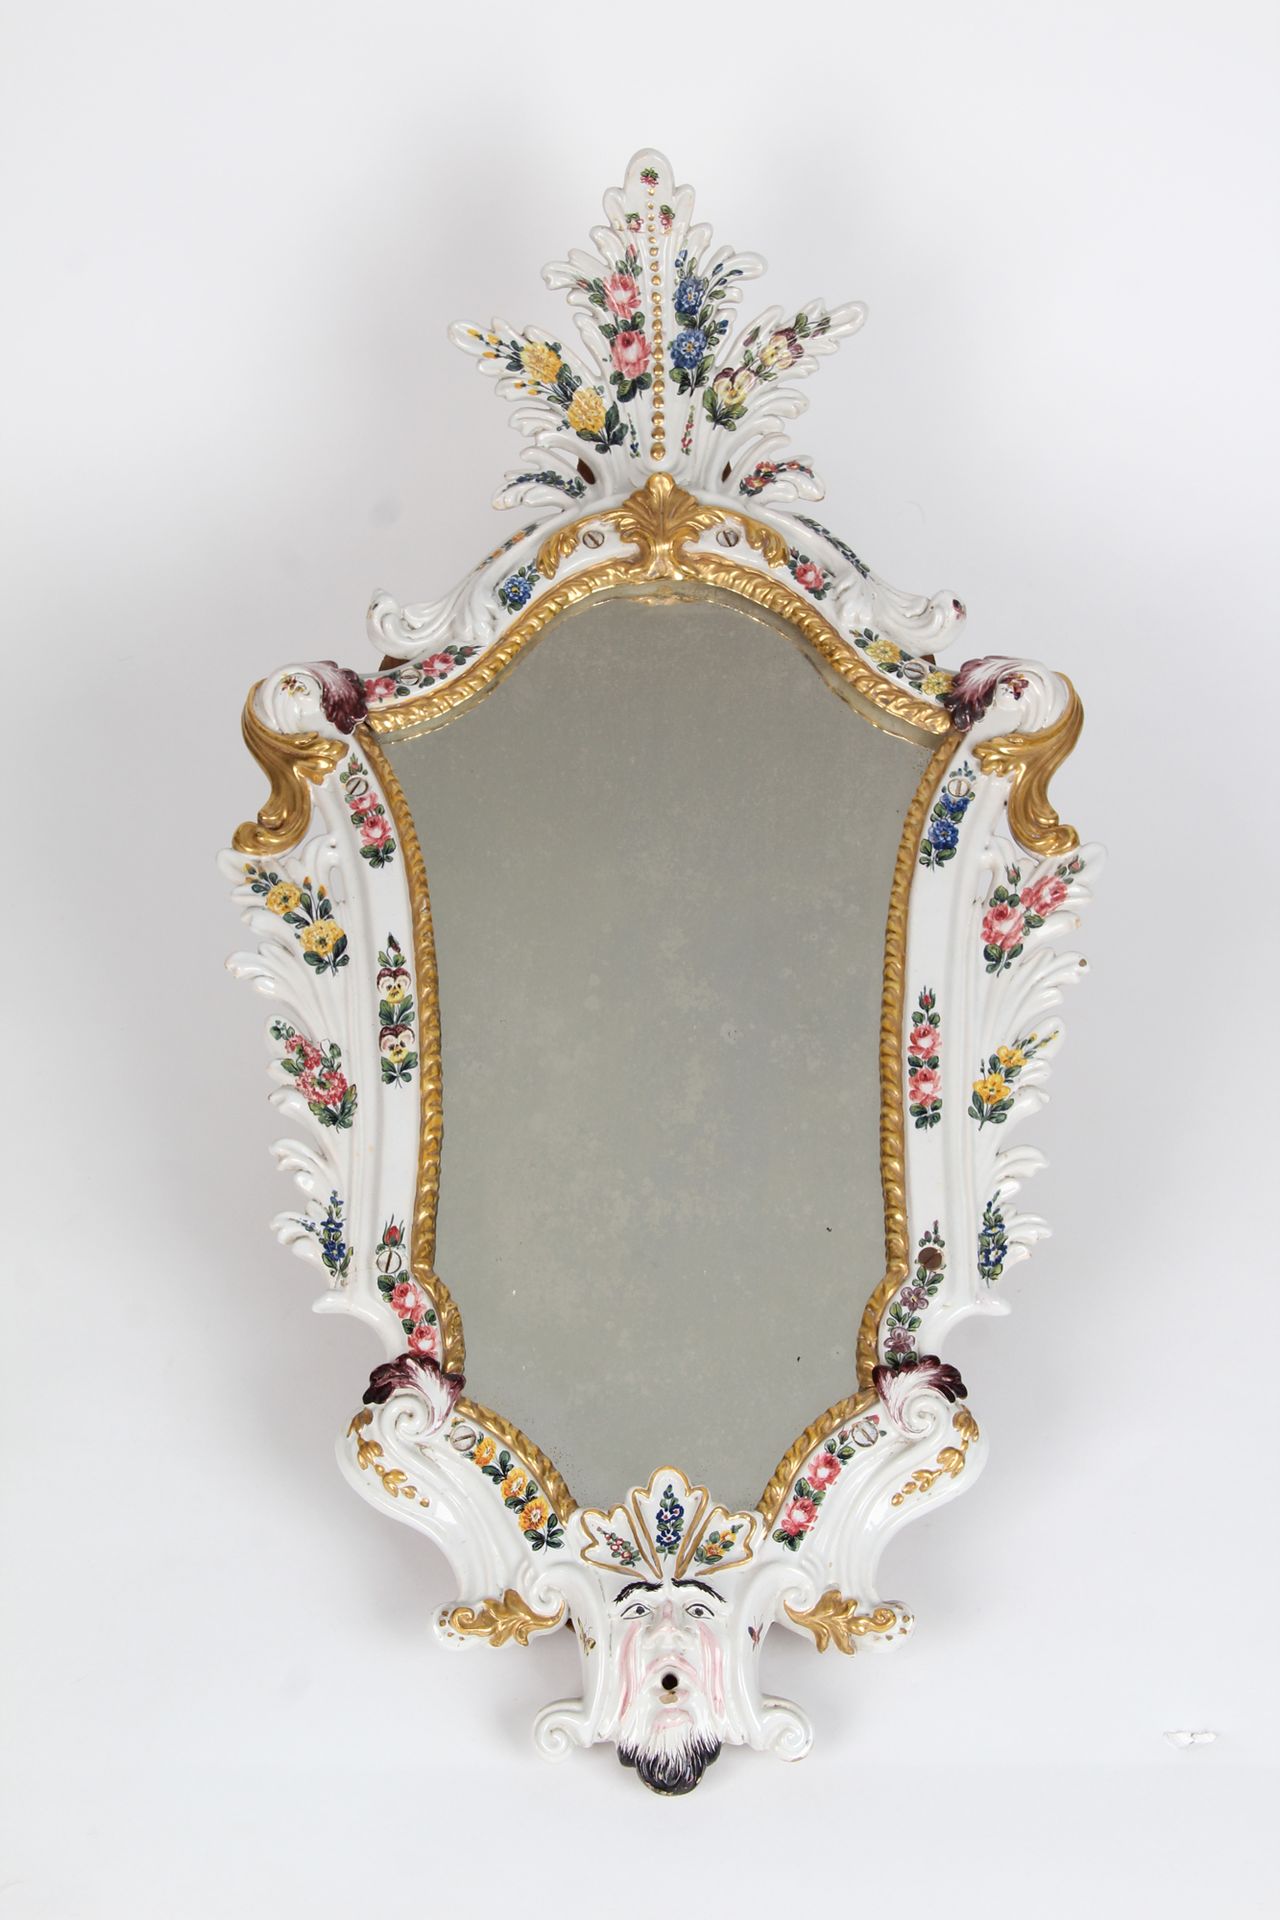 Null Porcelain light-plate mirror with foliage, scrolls and a faun's head decora&hellip;